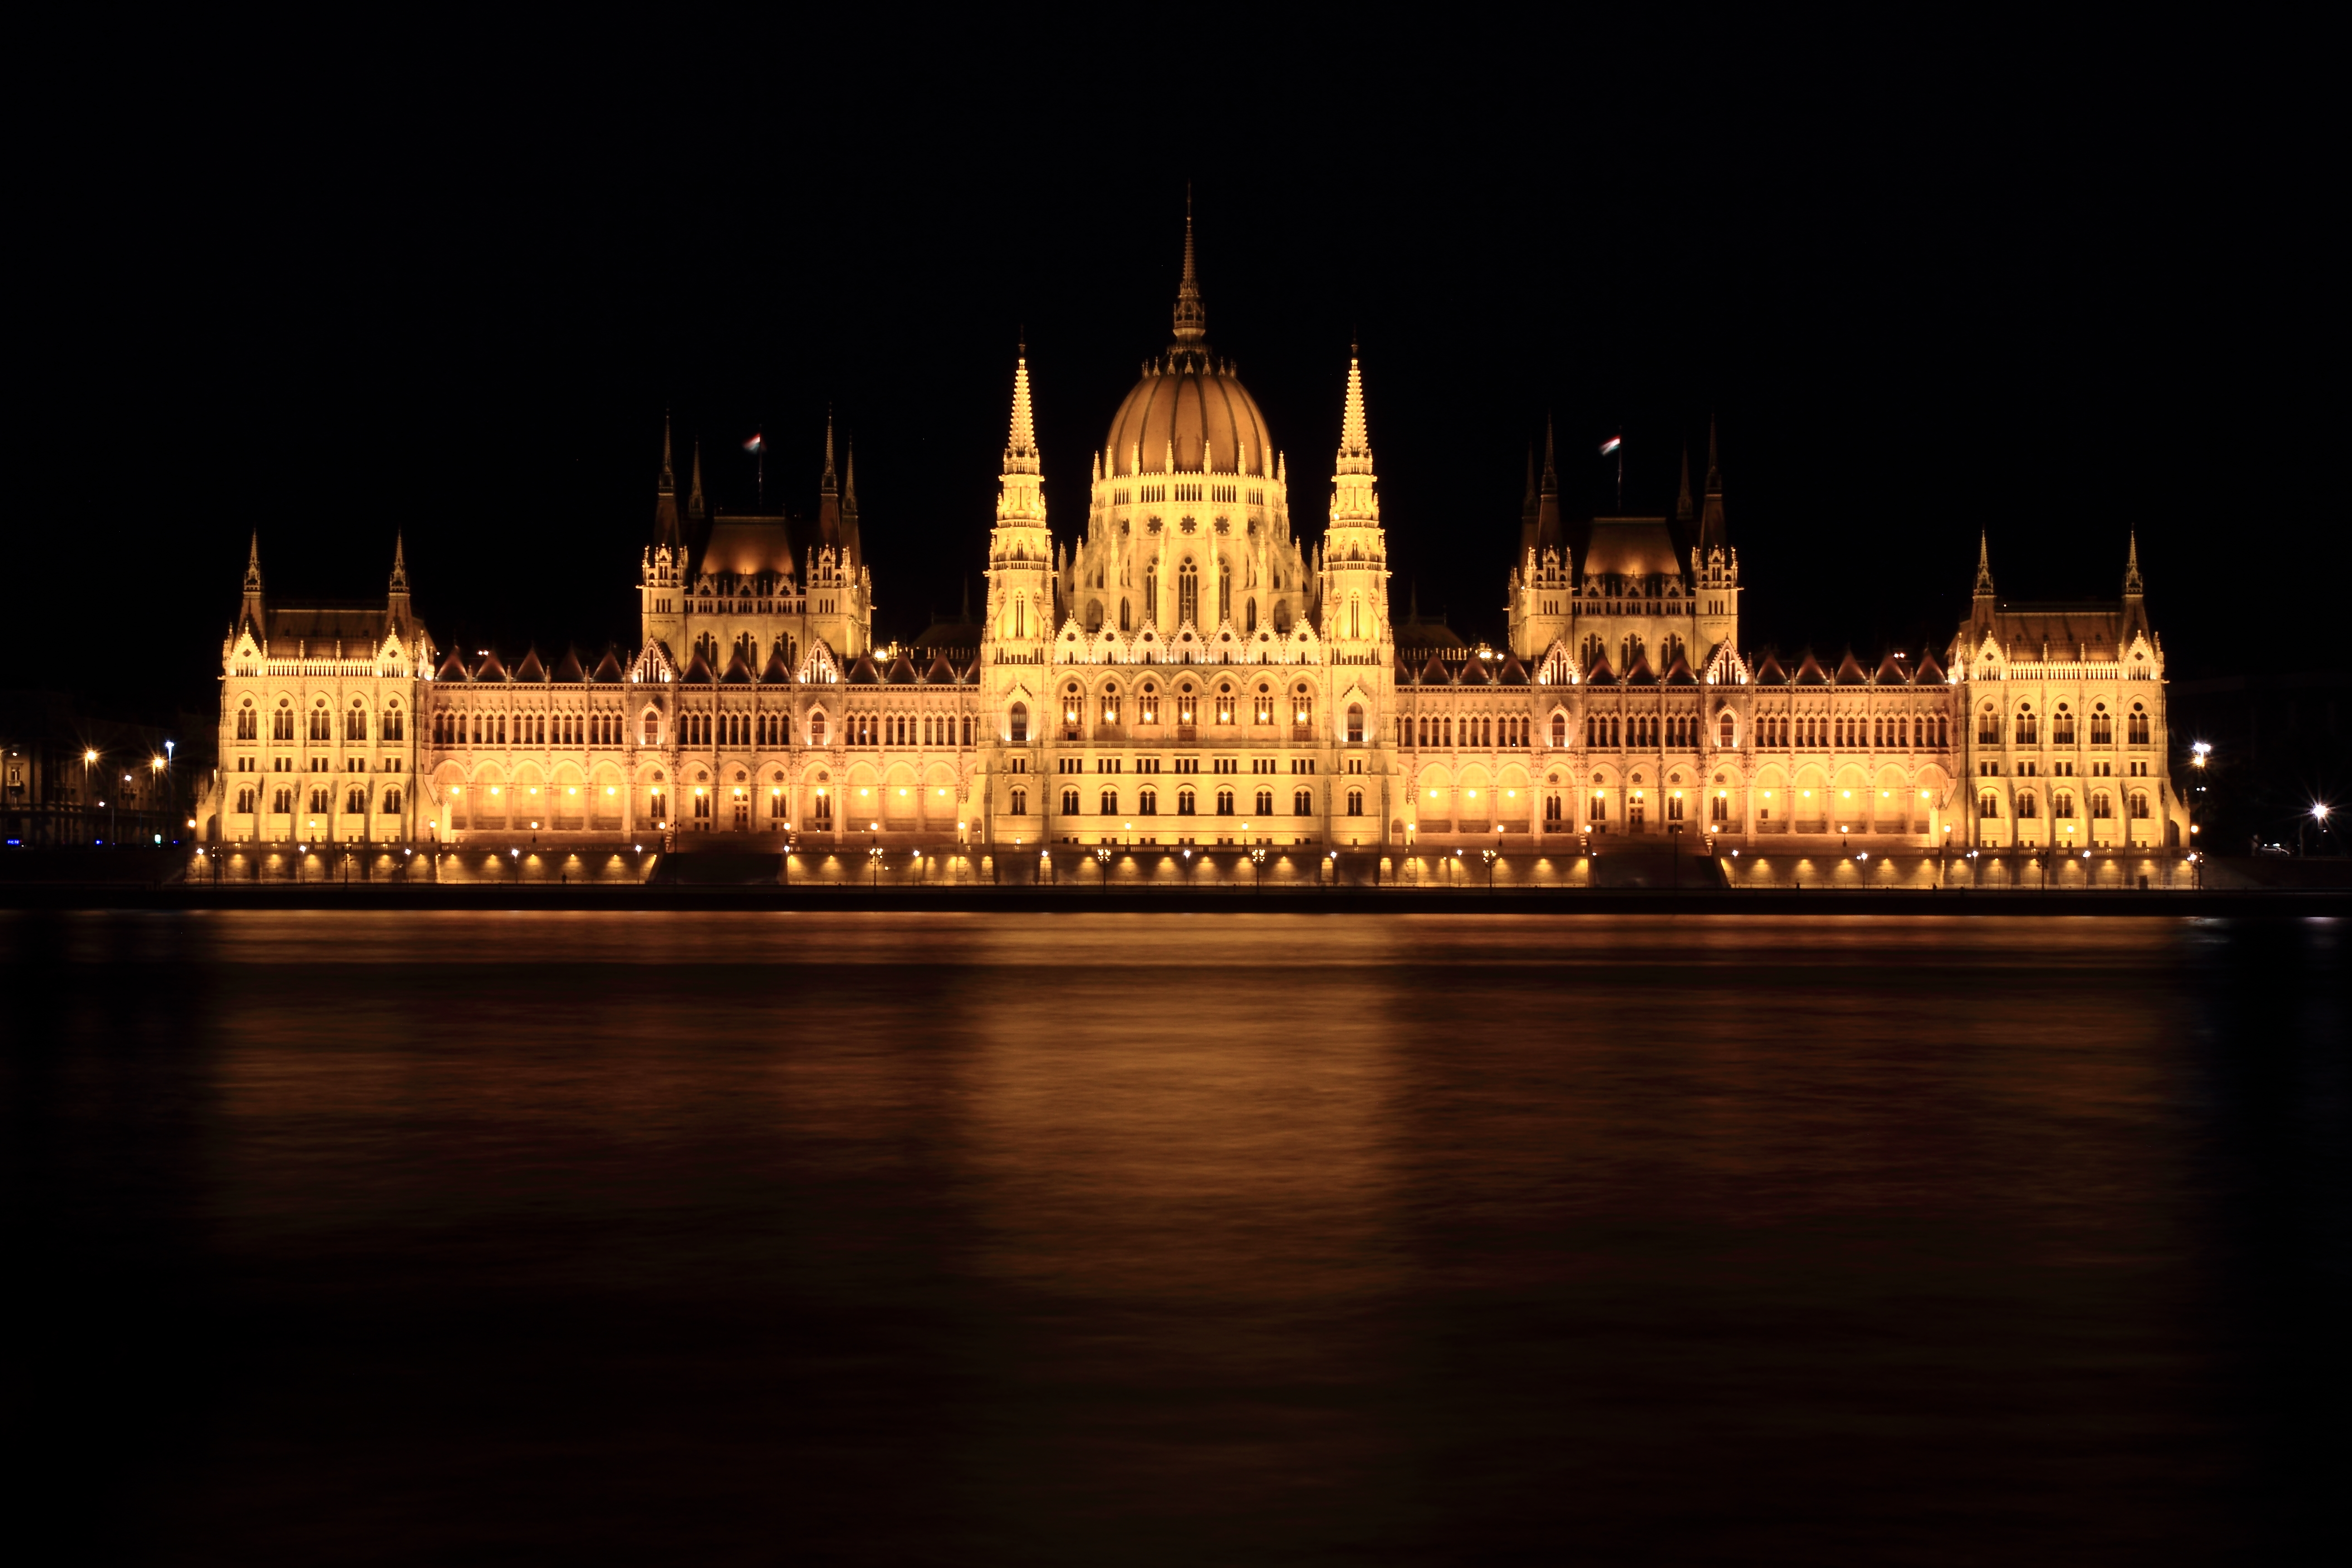 Architecture Budapest Danube Hungarian Parliament Building Hungary Night 5184x3456